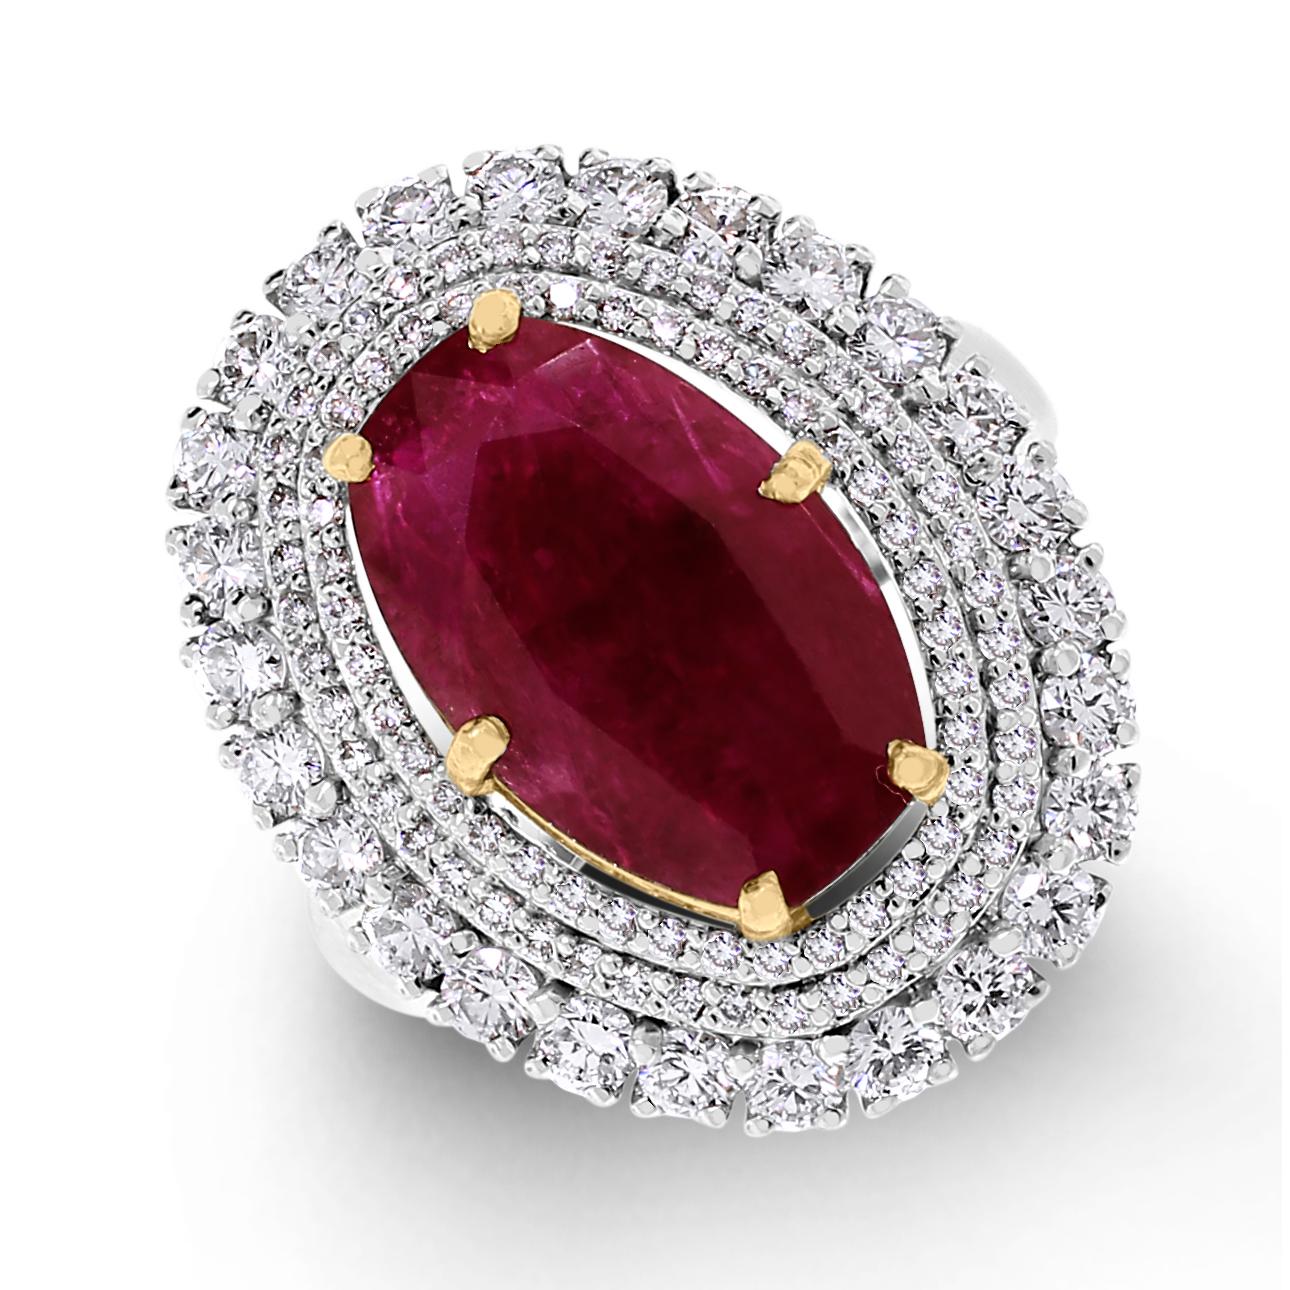 The Rita ring features a gorgeous stated ruby cradled with multiple diamond halos to create a 'Wow' effect. The rich color of the ruby pops against the brilliance of the diamonds.

Gemstones Type: Ruby
Gemstones Shape: Oval
Gemstones Weight: 4.56